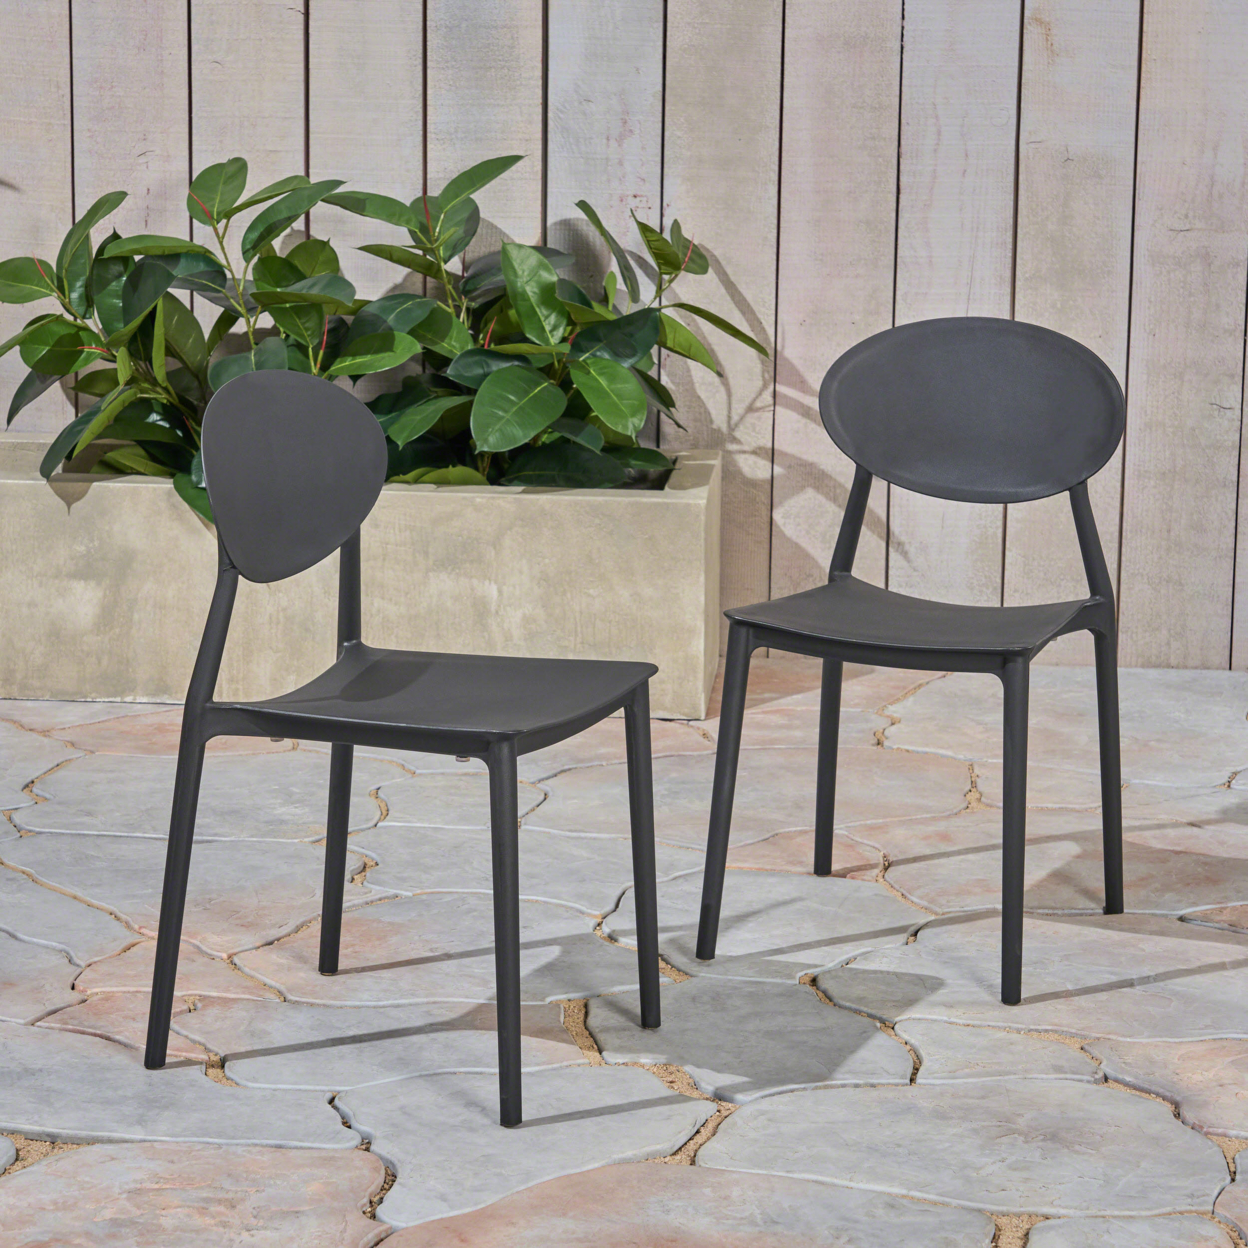 Brynn Outdoor Plastic Chairs (Set Of 2) - Black, Set Of 4